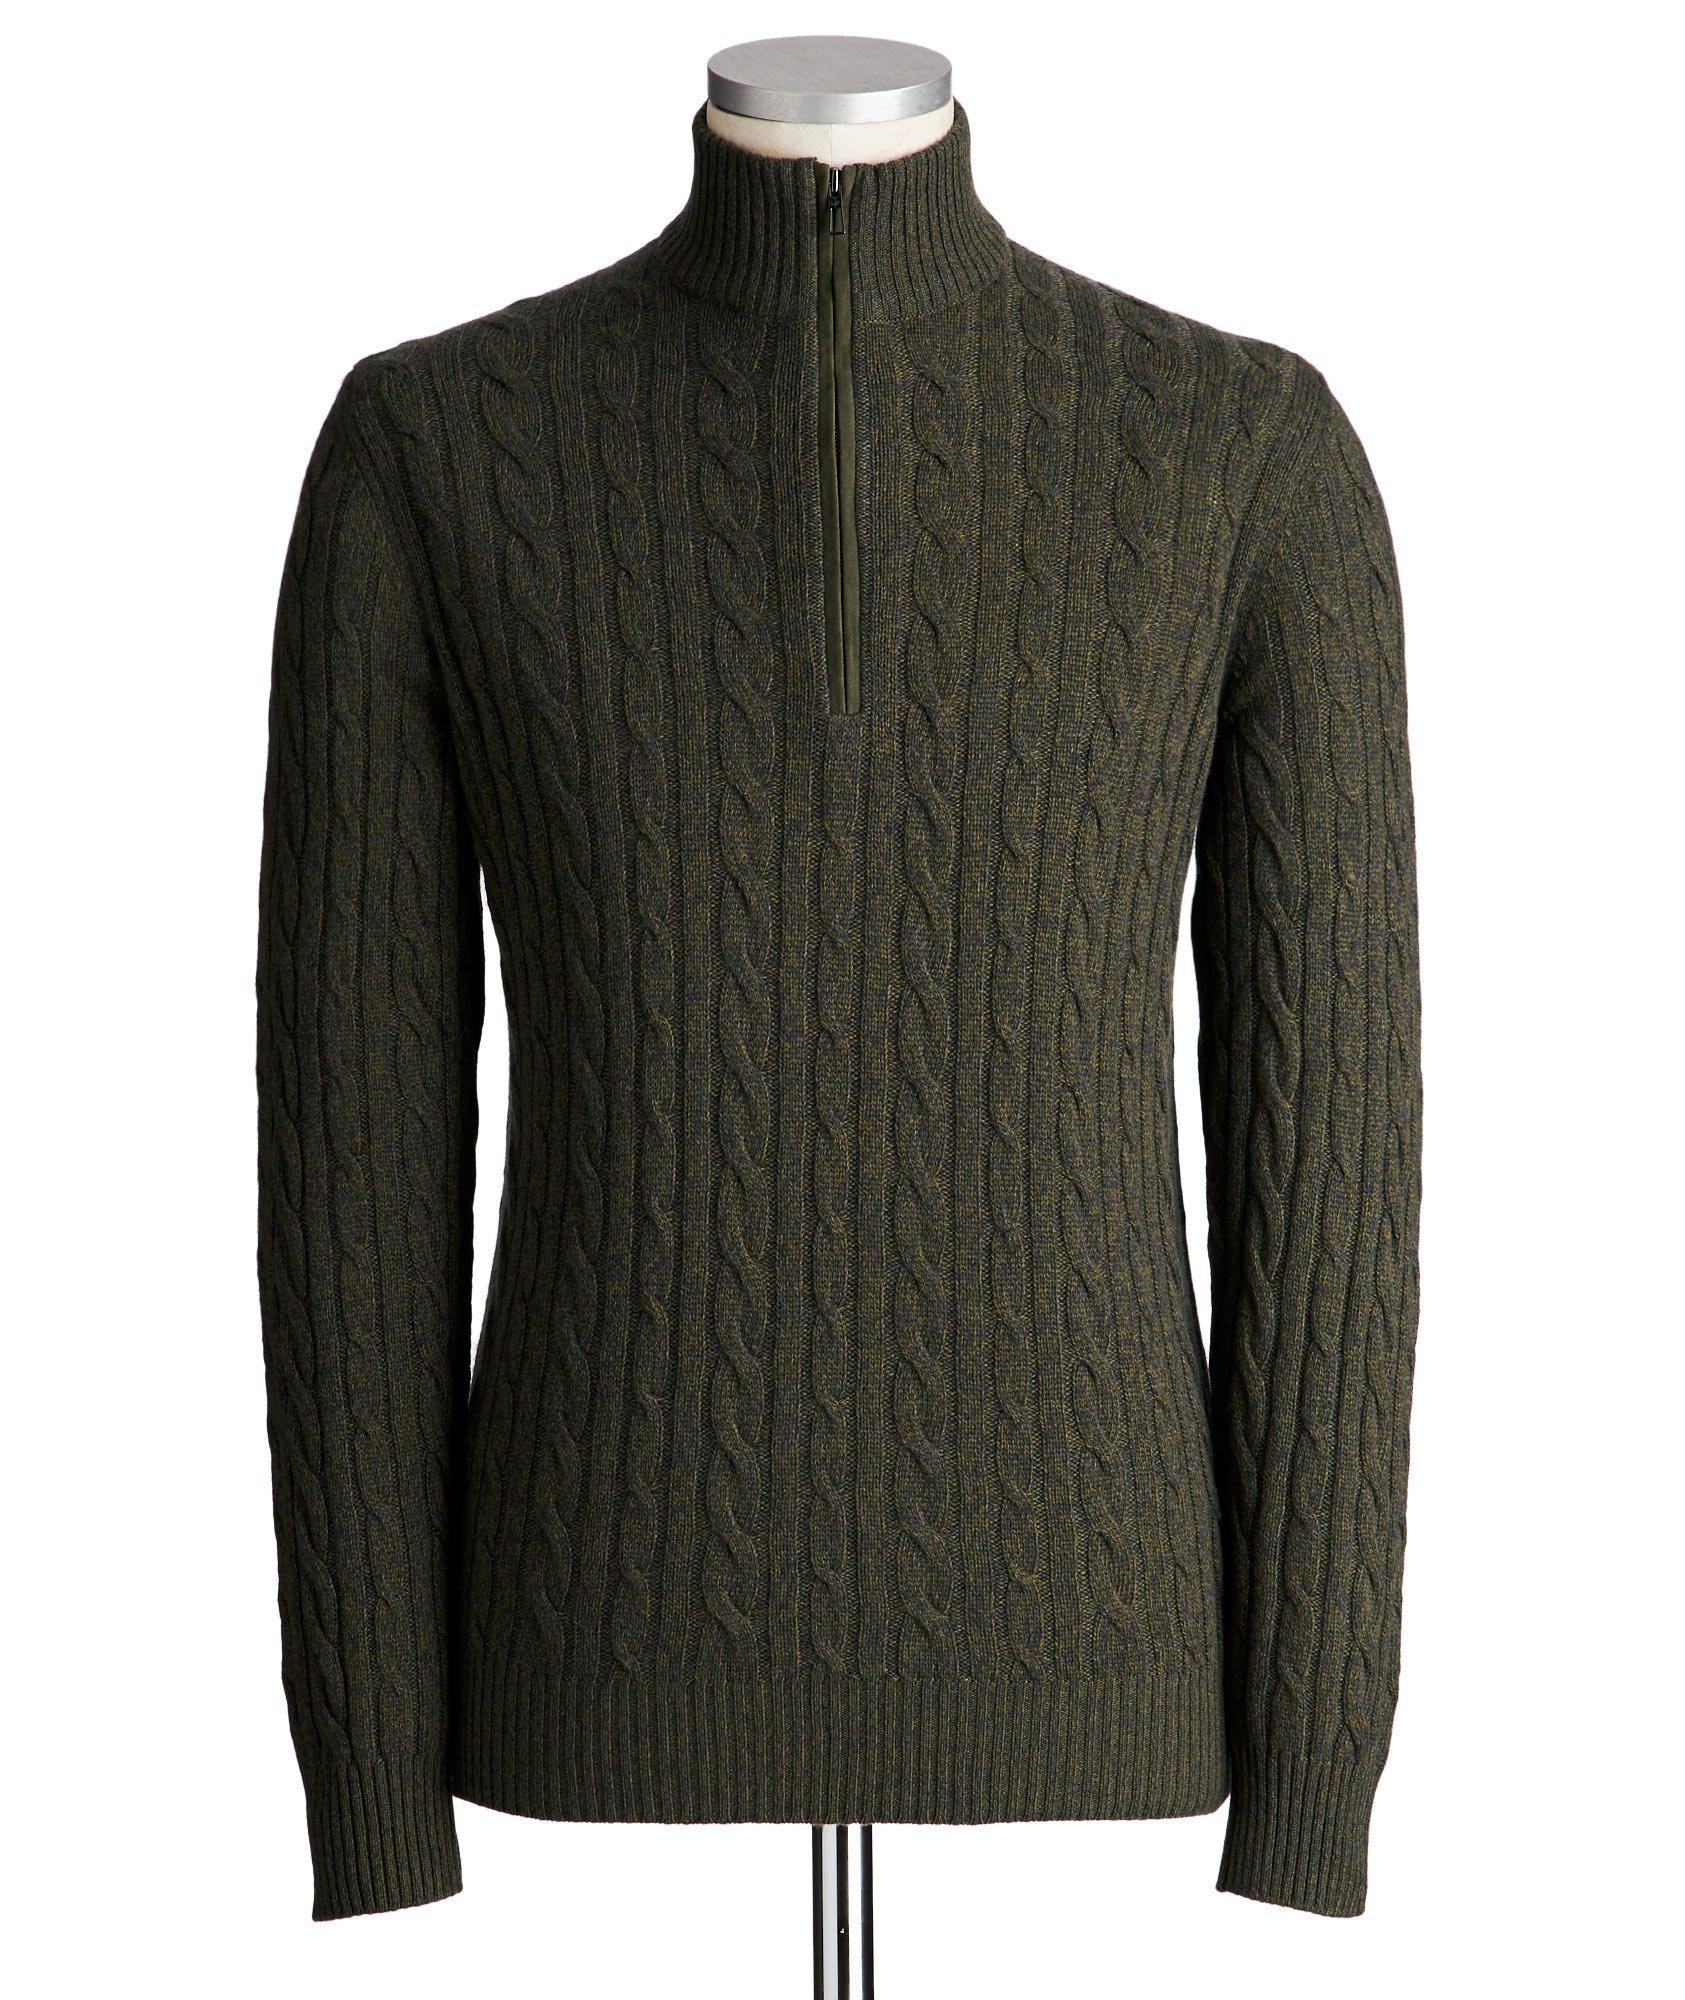 Half-Zip Baby Cashmere Cable Knit Sweater image 0